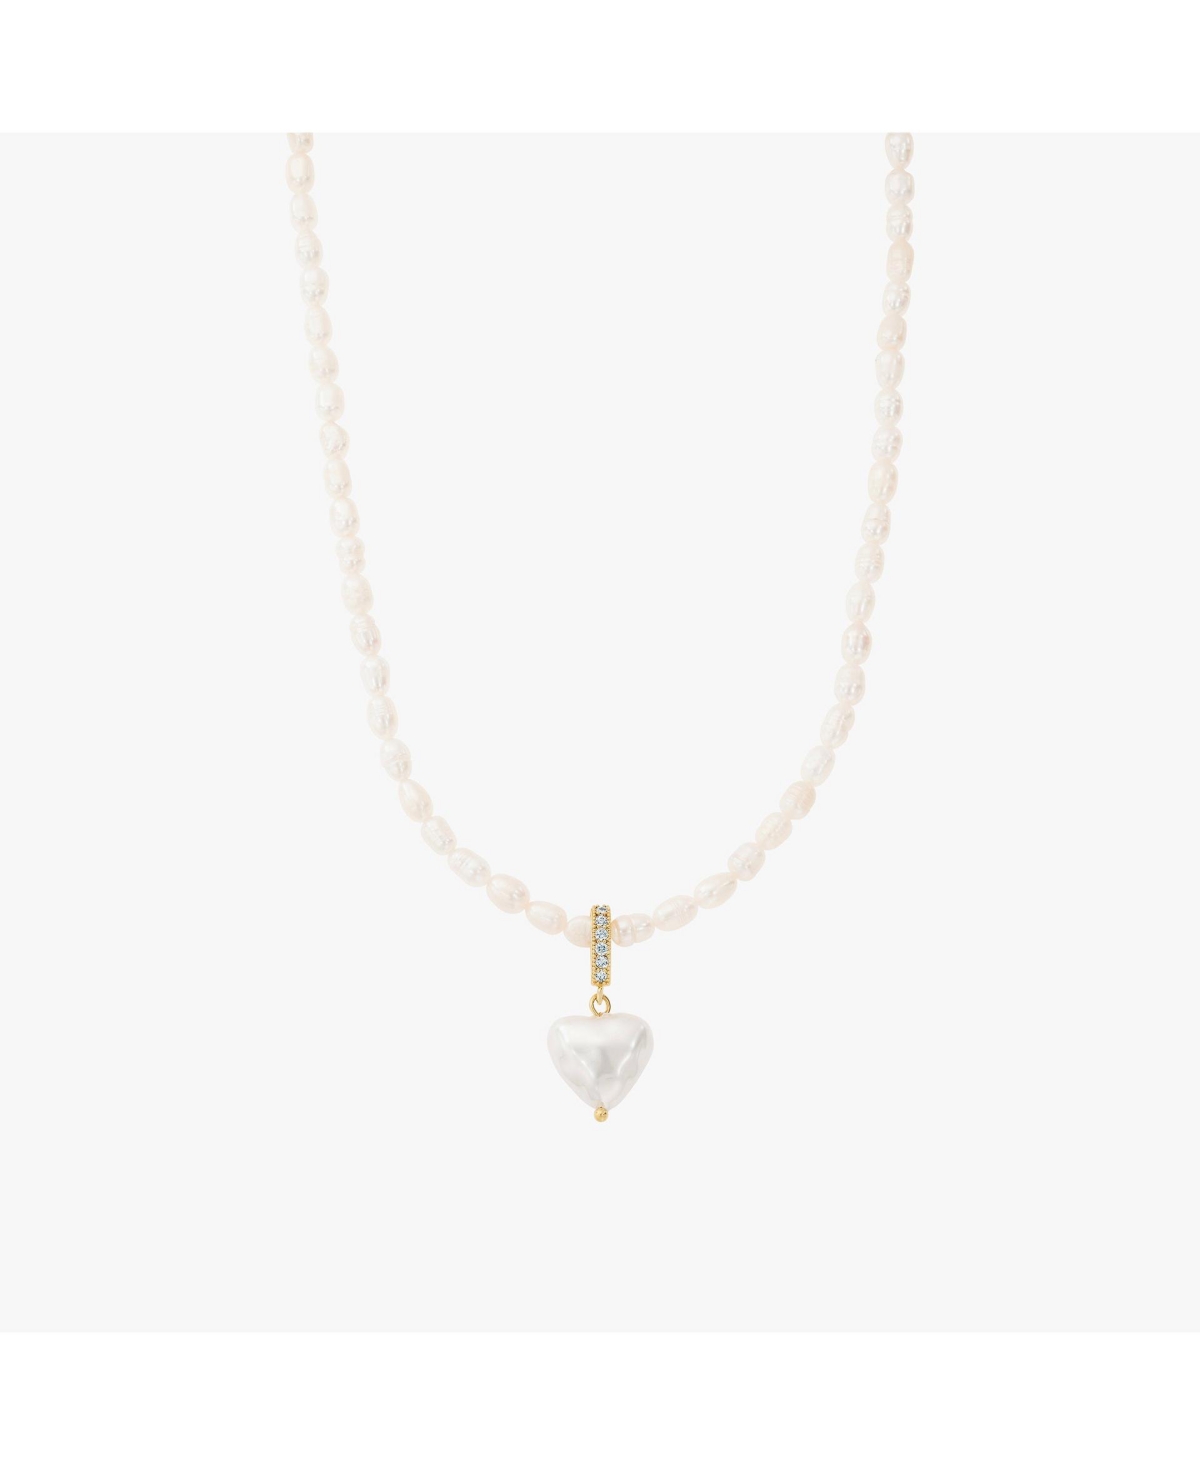 Hope Cultured Pearl Necklace with Heart Shaped Charm Pendant - White